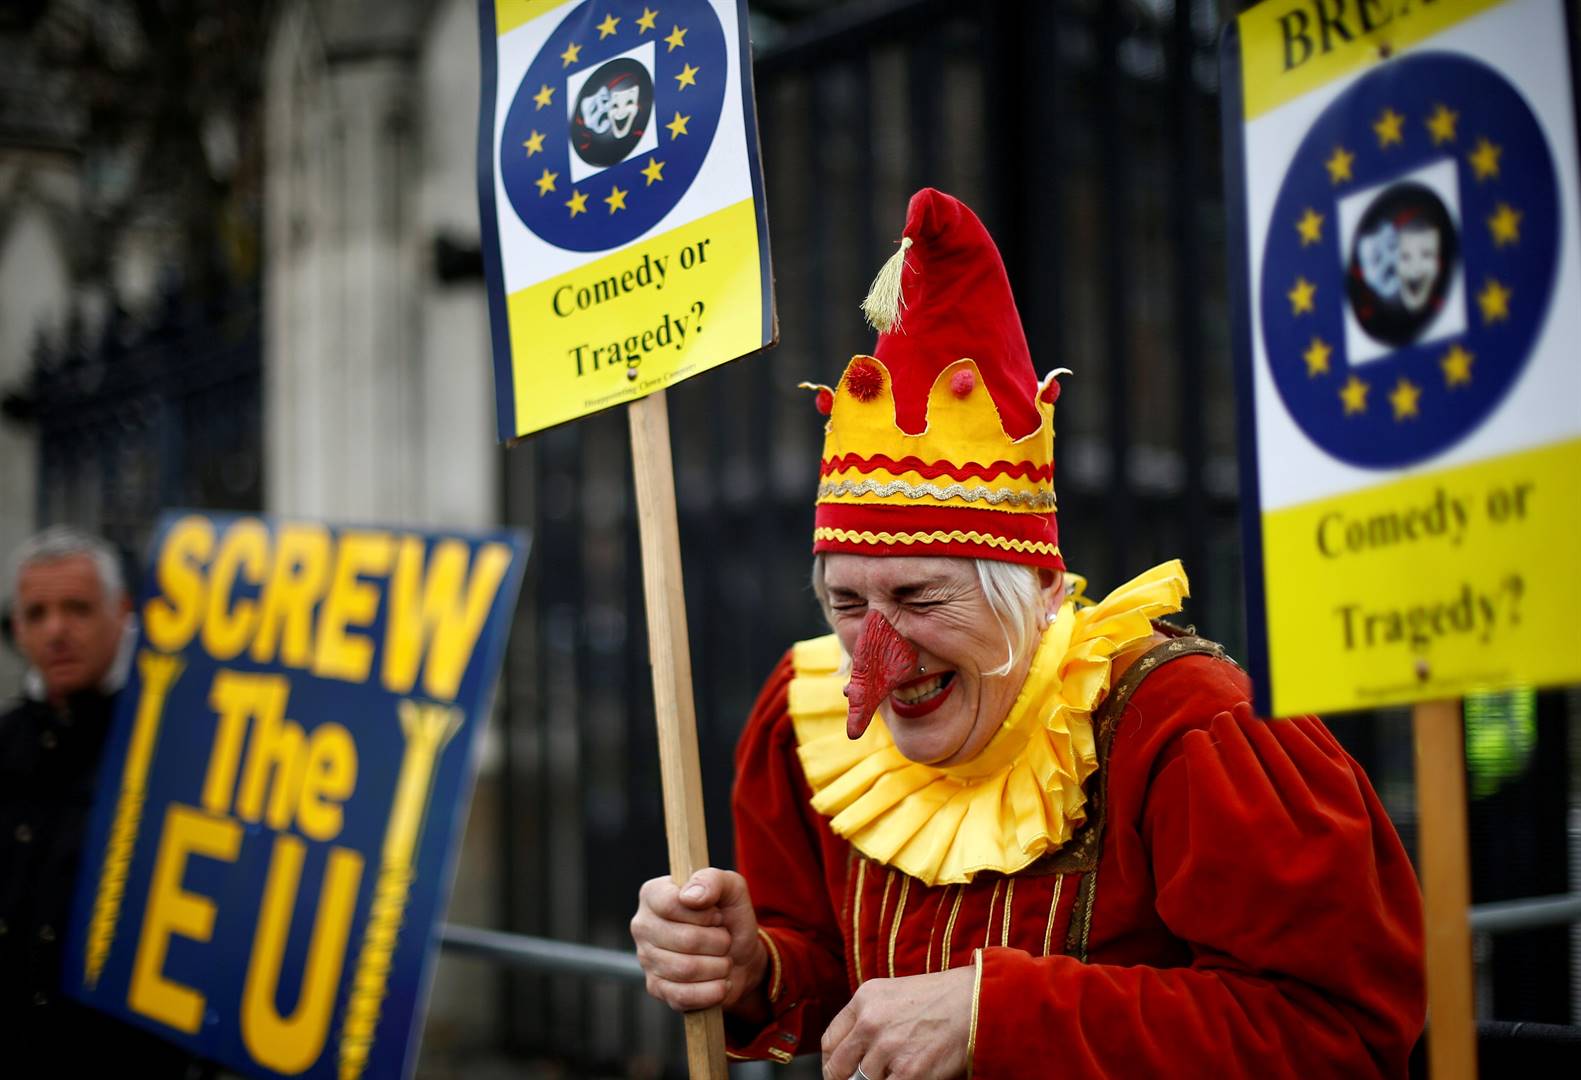 An anti-Brexit protester reacts next to a pro-Brexit protester in London on Wednesday (March 27 2019). Picture: Henry Nicholls/Reuters